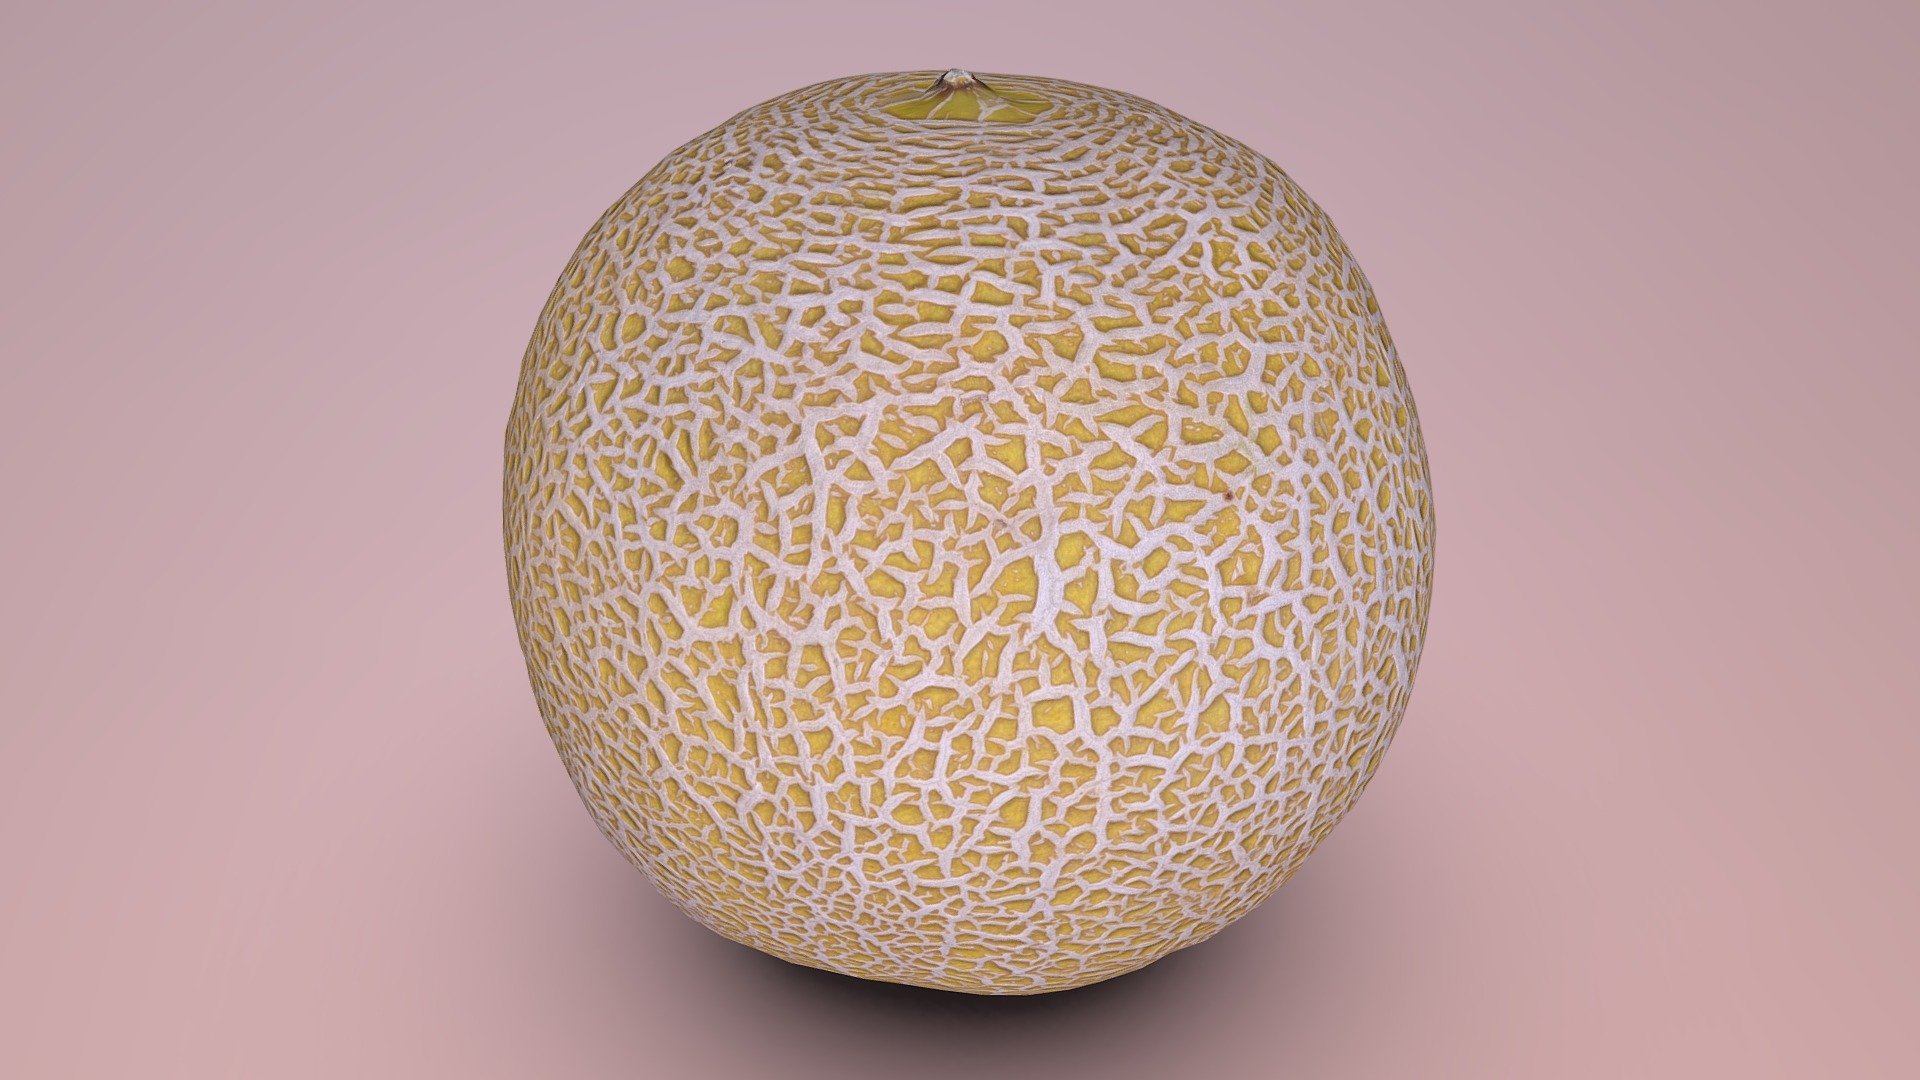 Simple cantaloupe




Photorealistic

Download contains 3 LODs (392, 1562 and 6242 vertices)

Quad based topology

Watertight mesh for easy 3D printing

Diffuse texture size: 4096x4096

Roughness map size: 4096x4096

Normal map sizes 1024x1024, 2048x2048, 4096x4096

Optimized normal map for each LOD (or use the “medium” one for all LODs to save space)

All other textures shared between LODs for your convenience
 - Cantaloupe - Buy Royalty Free 3D model by KuMa Digital Studios (@romay) 3d model